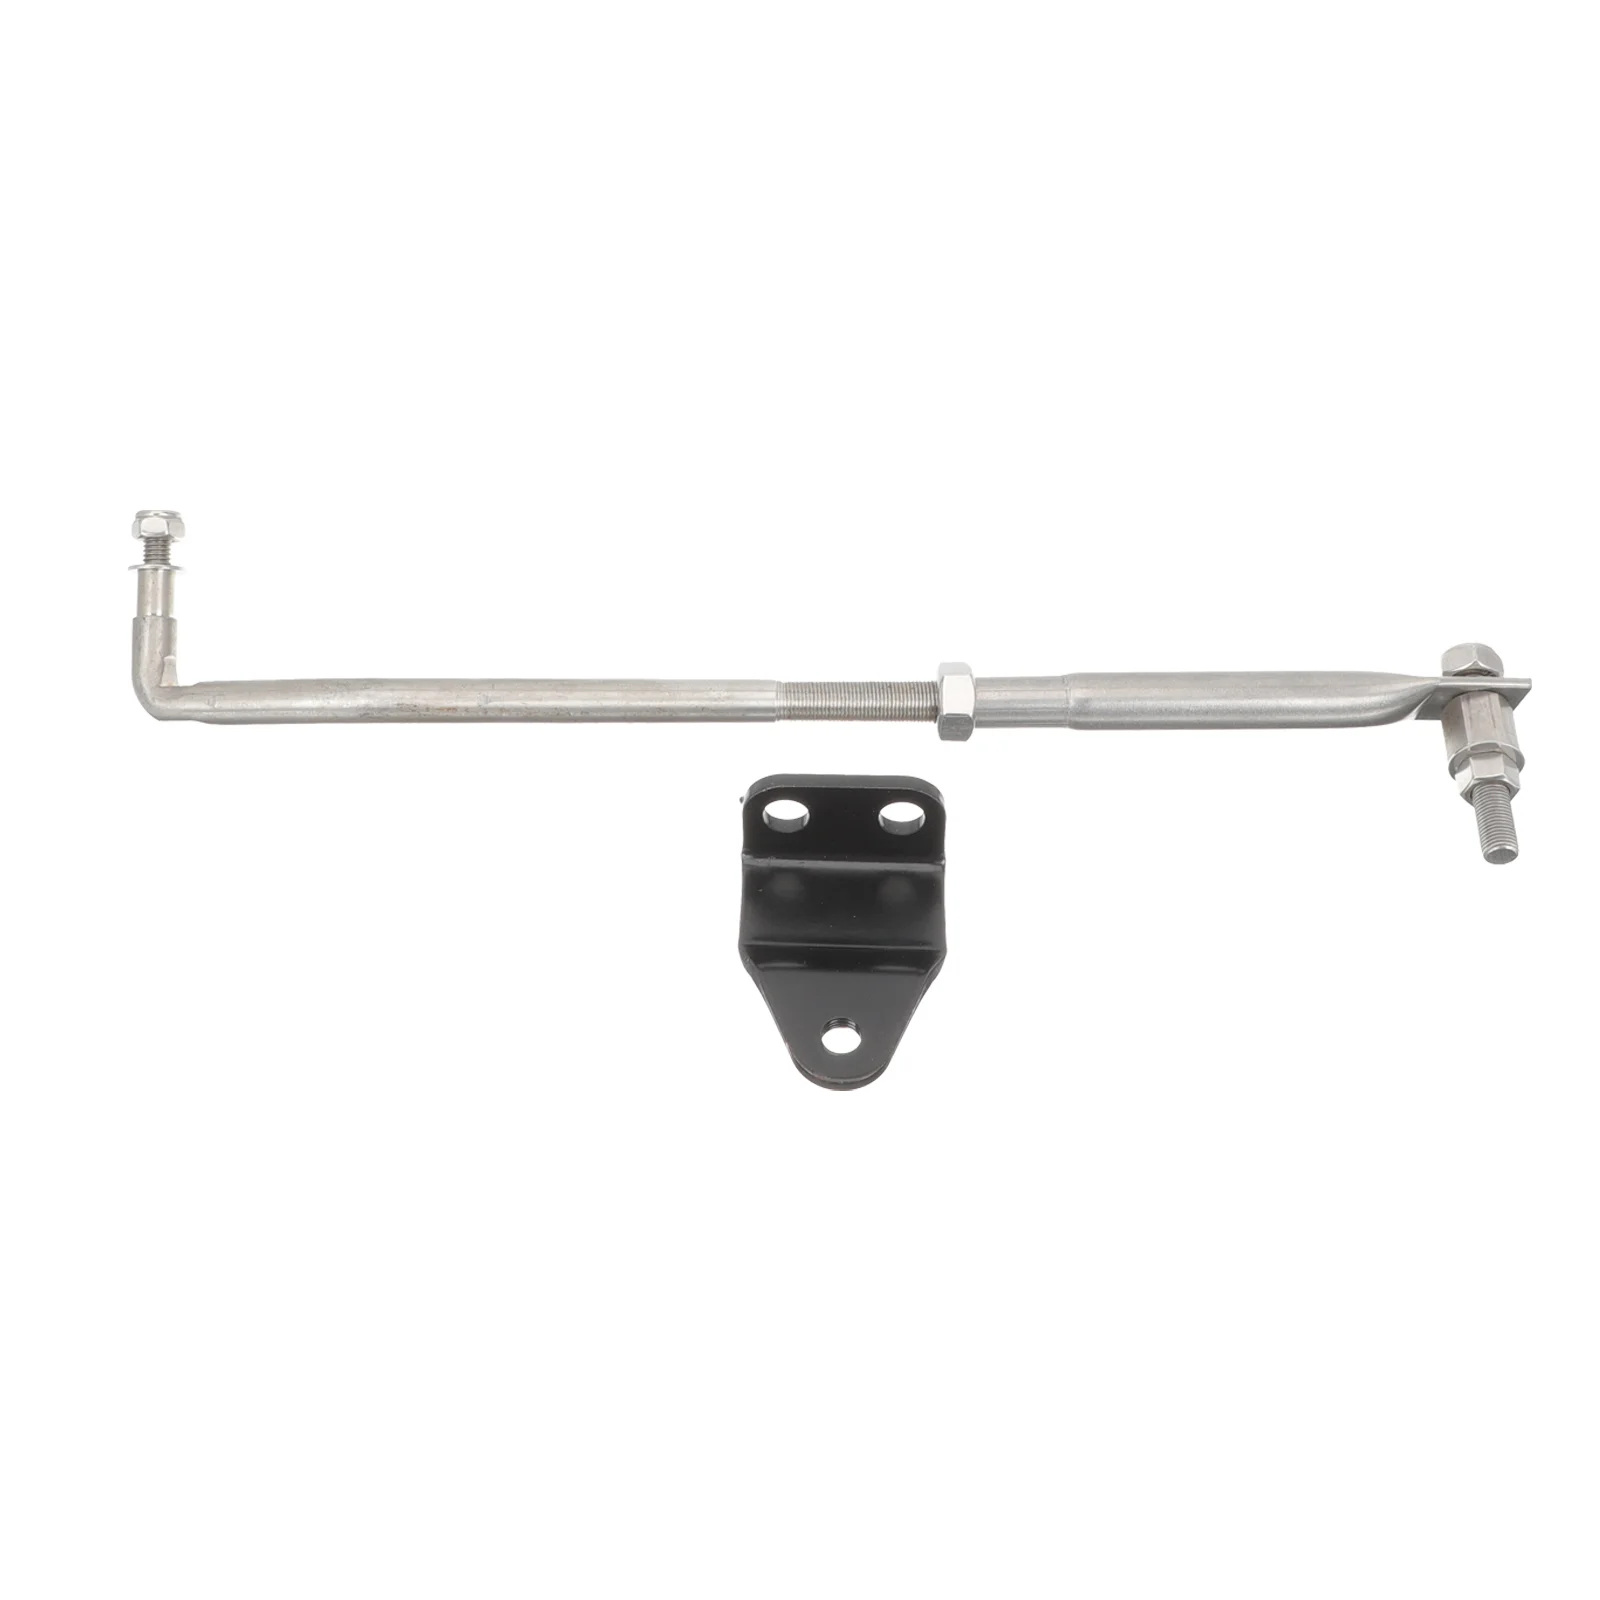 

Steering Outboard Rod Engine Lever Professional Tiller Wear Resistant Connecting Boat Stainless Accessory Motor Convenient